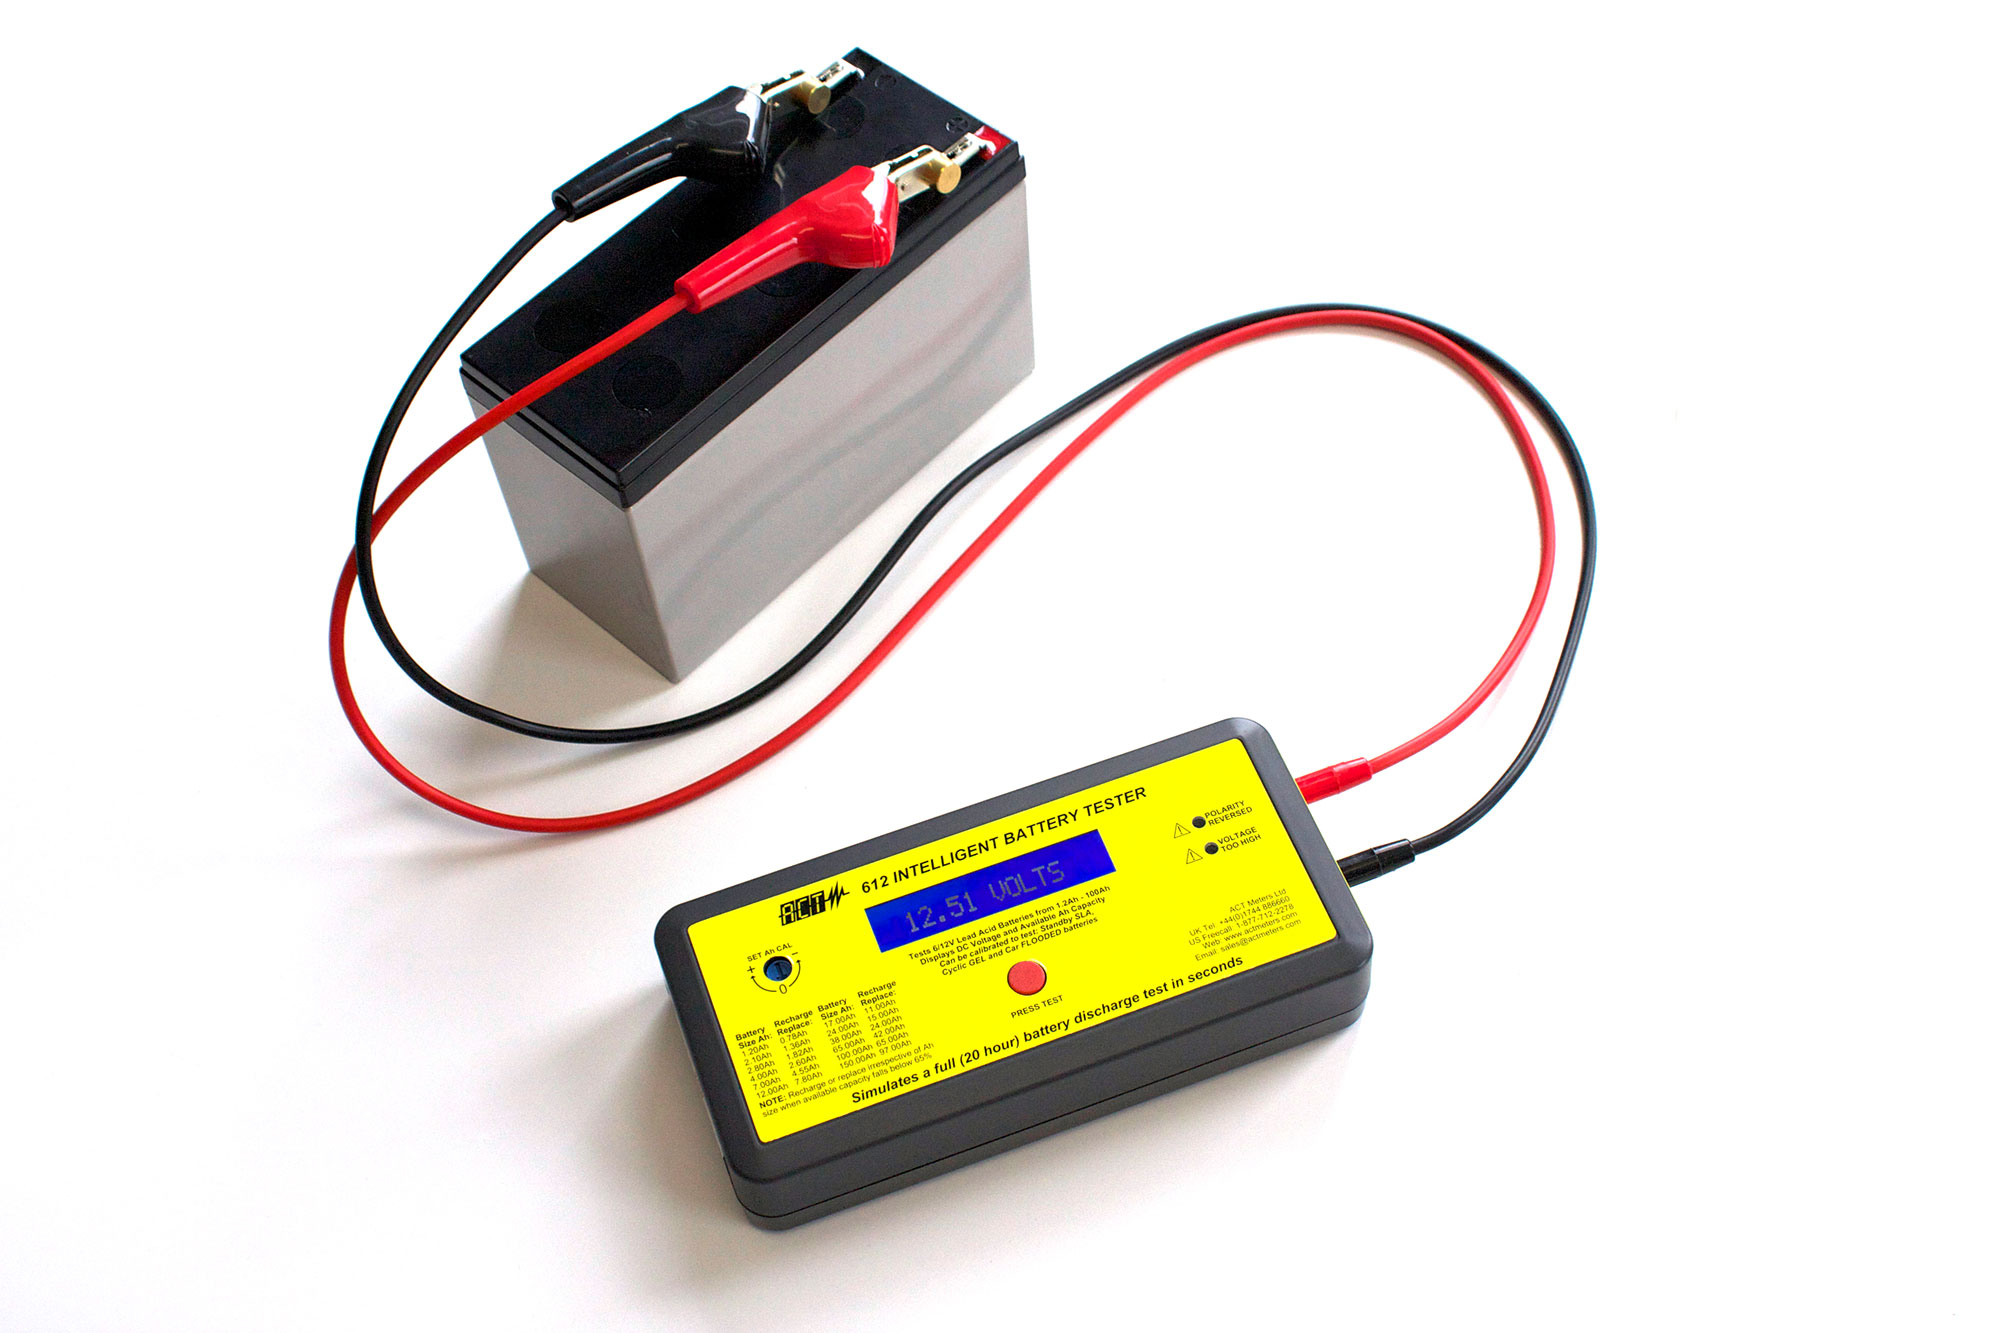 RC-300; Technician Grade Intelligent Handheld SLA and STANDBY Battery Tester  For 6V & 12 Applications